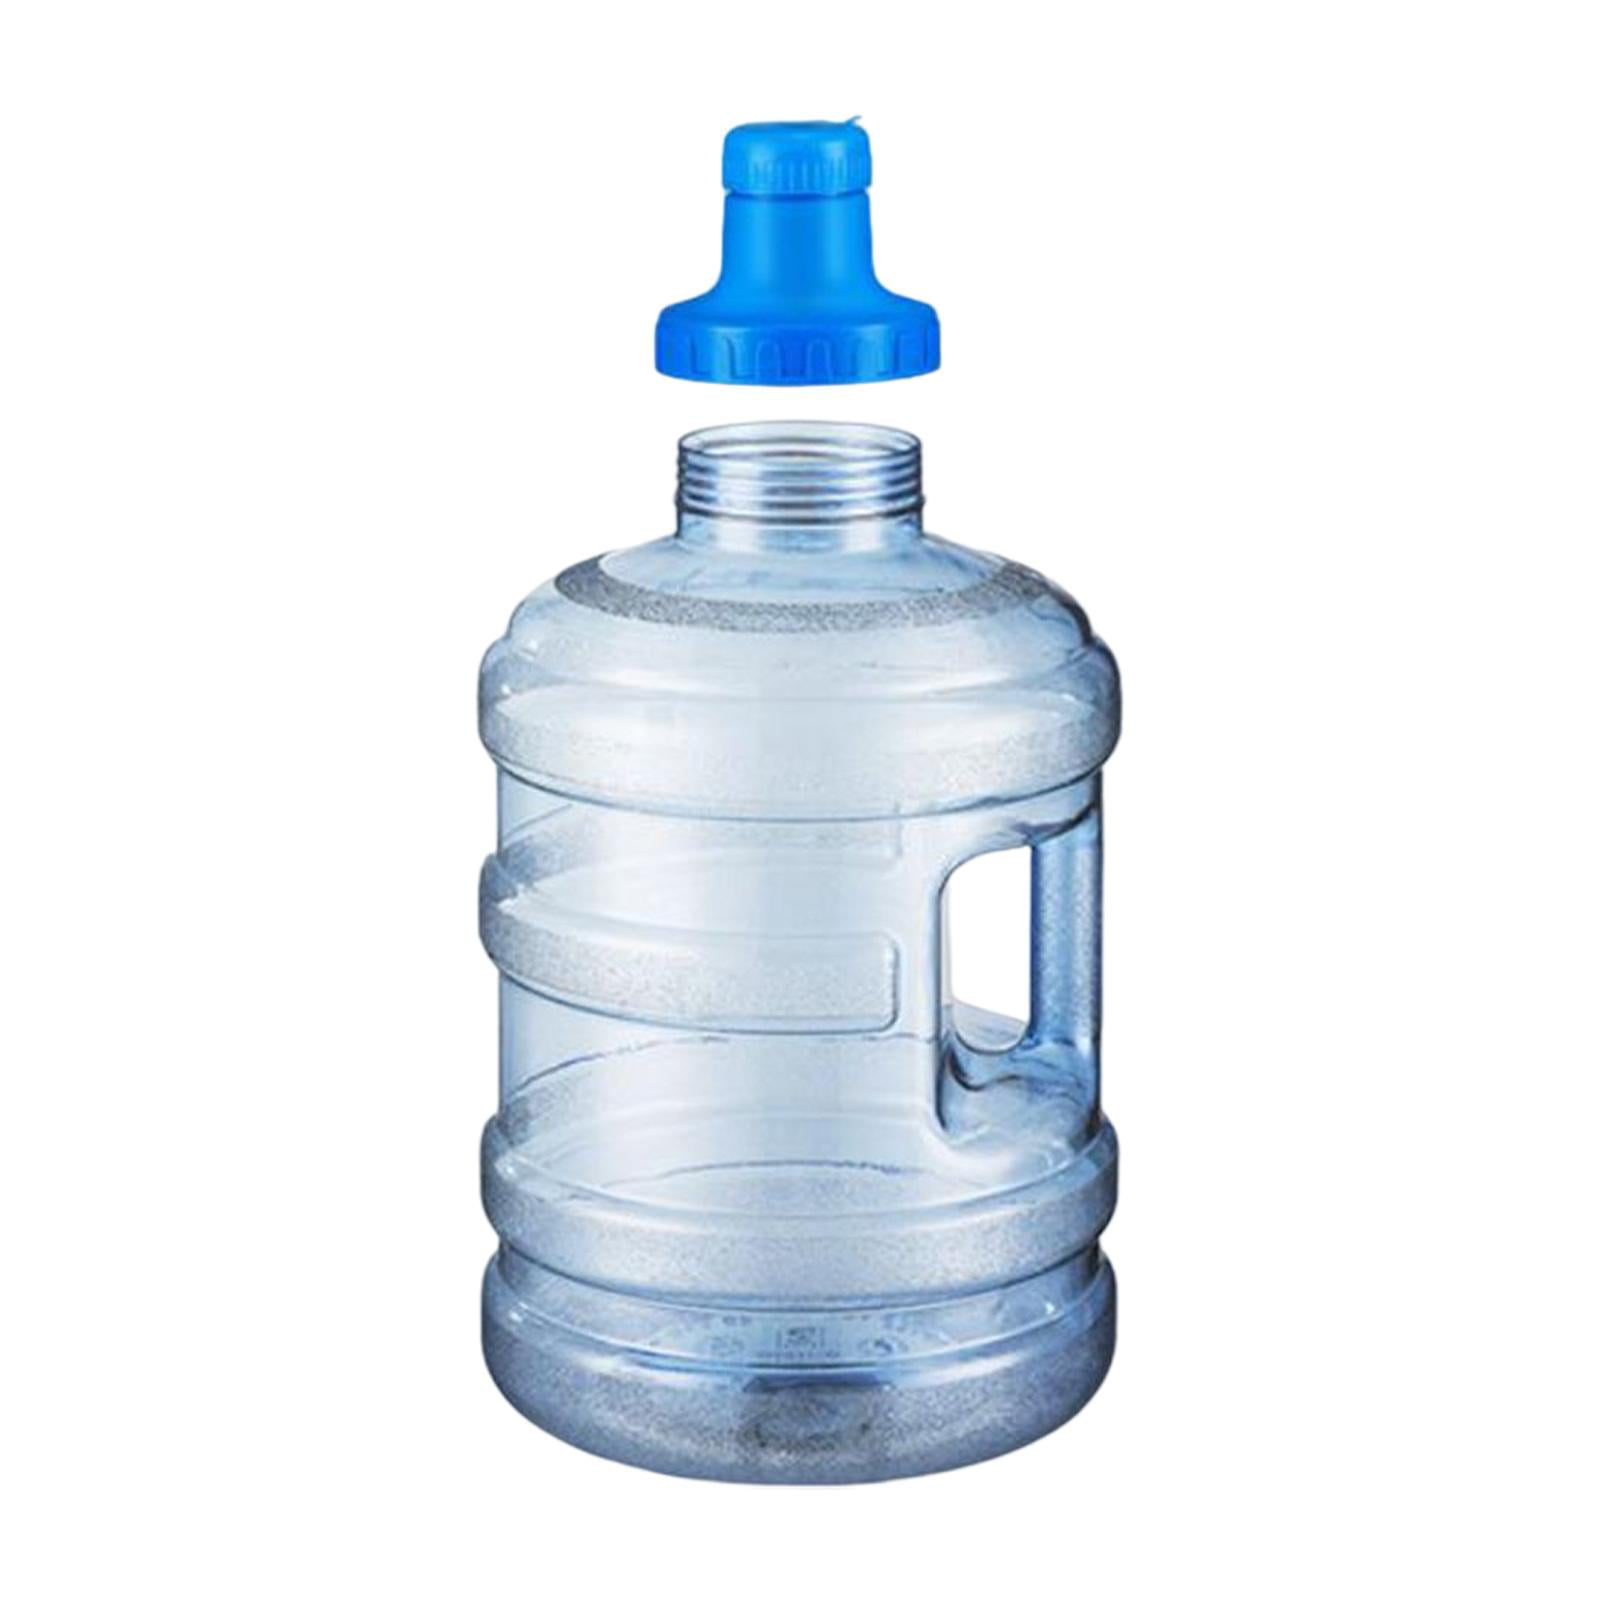 Water Jug Gallon Jug Round Water Bottle with Detachable Cap